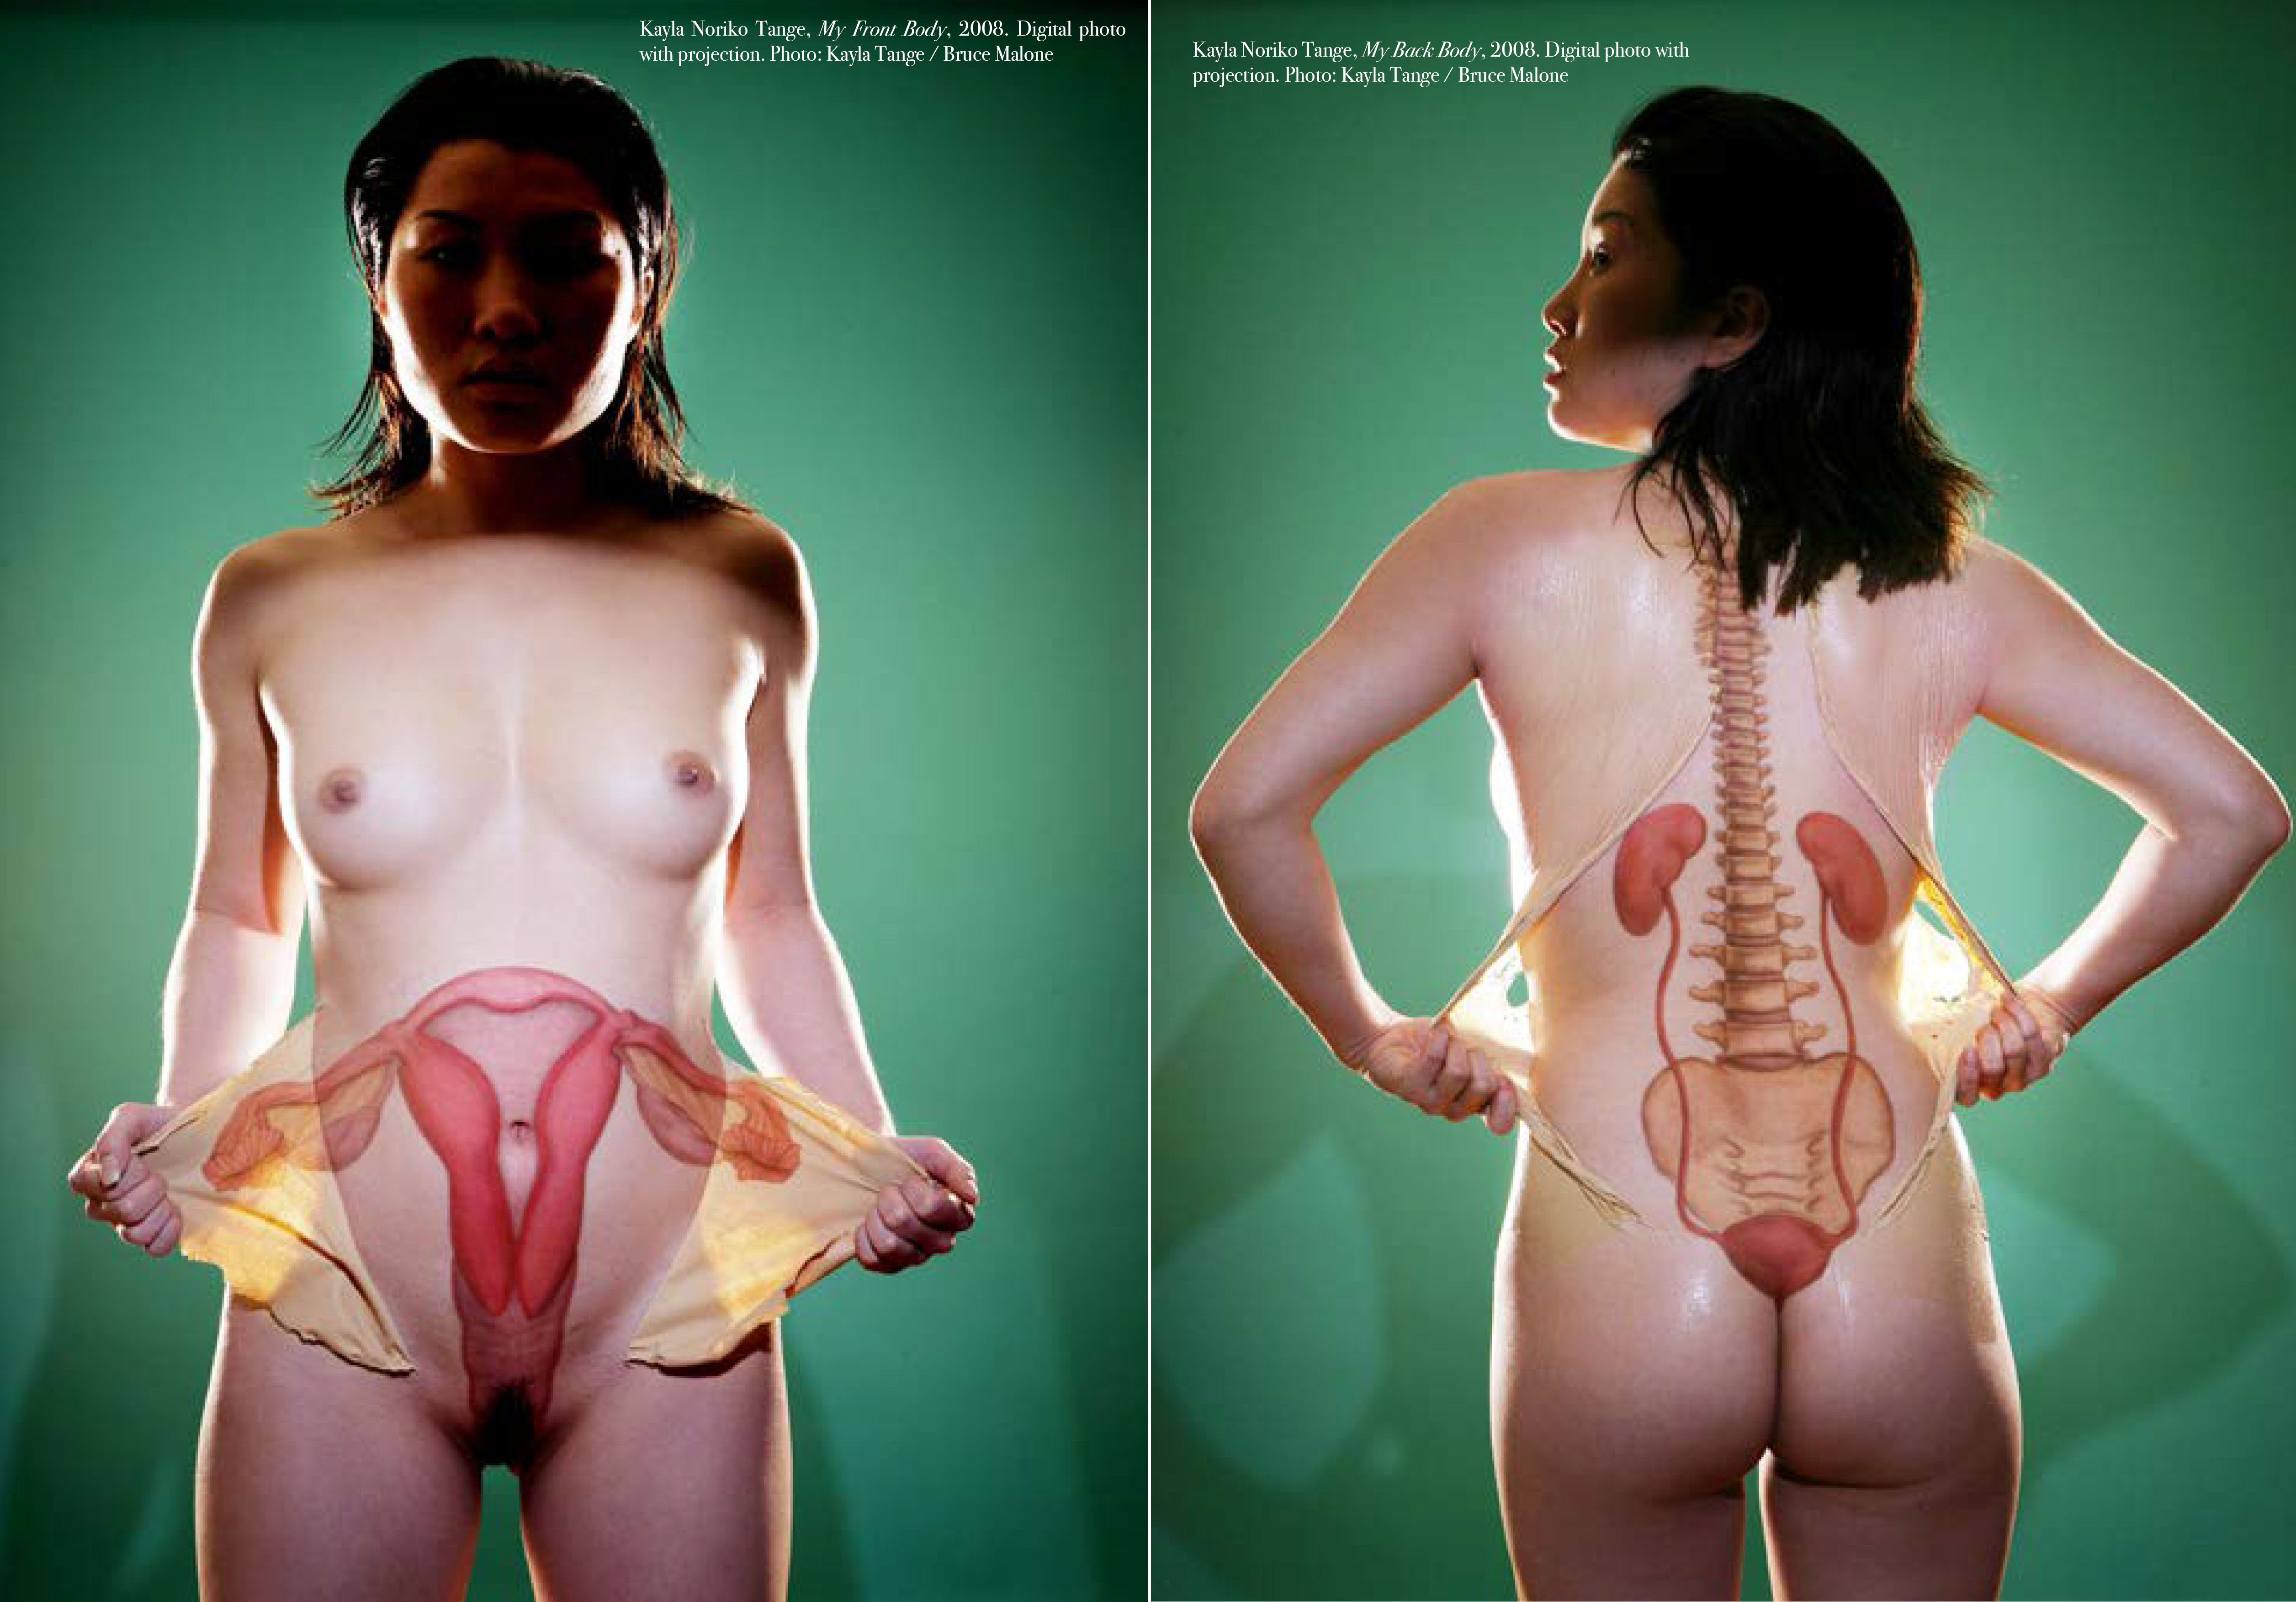 Page left: Against a green backdrop, the artist poses so that the front of her nude body is visible from the thighs up. Her face is cast in shadow. With both hands, she peels fake skin away from each side of her abdomen to reveal a pink anatomical drawing of a reproductive system, including the vaginal canal, uterus, fallopian tubes, and ovaries. Page right: Against a green backdrop, the artist poses so that the back of her nude body is visible from the thighs up. Her face is cast in shadow and visible in profile. With each hand, she peels a panel of fake skin away from each side of her back at the waist, revealing an anatomical drawing of a spine, pelvis, kidneys, and bladder.